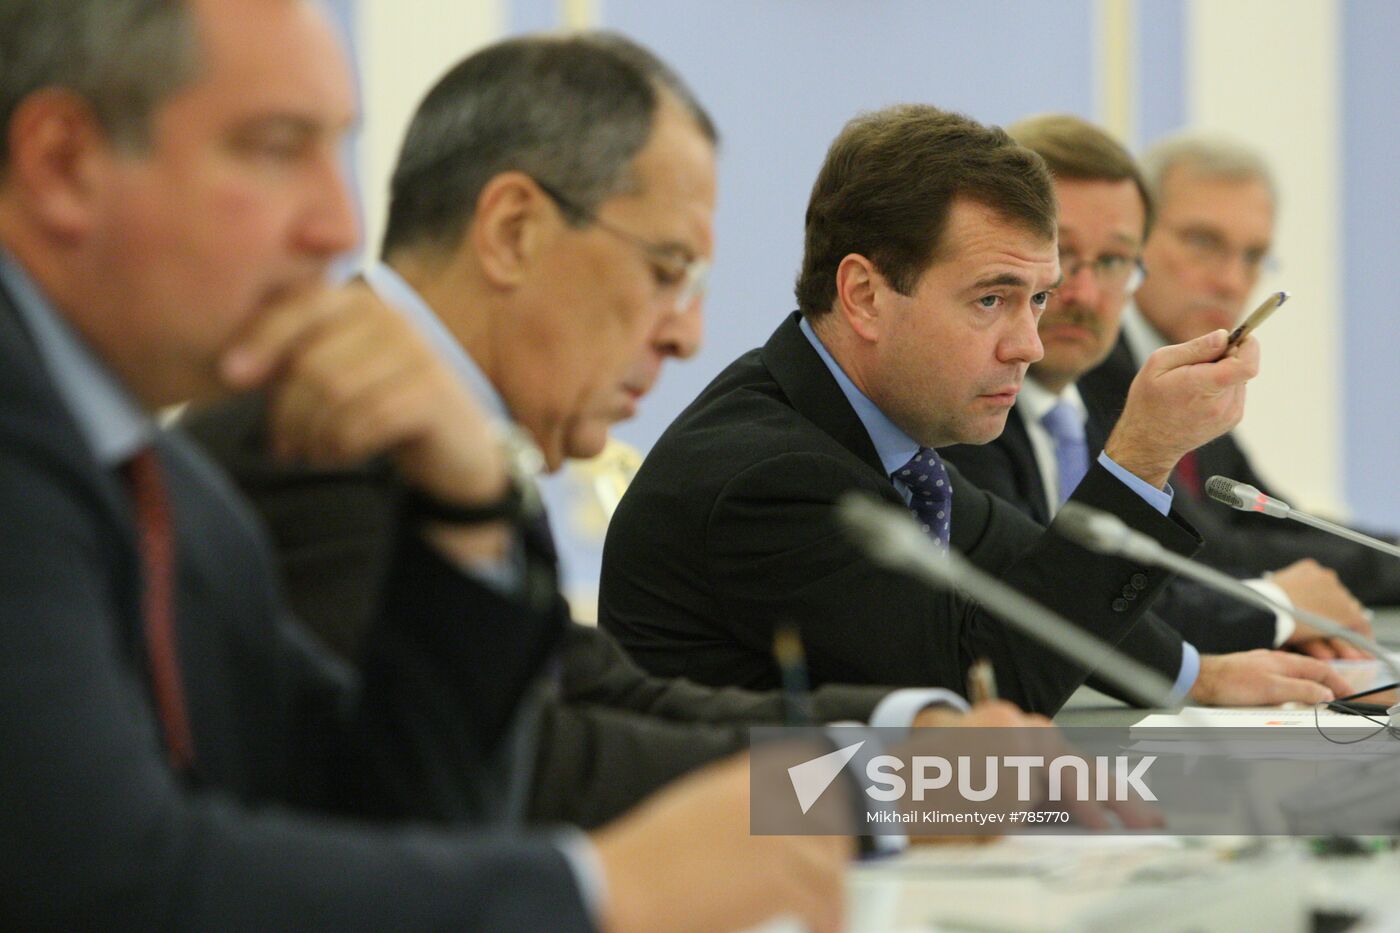 Dmitry Medvedev meets with Munich Conference participants